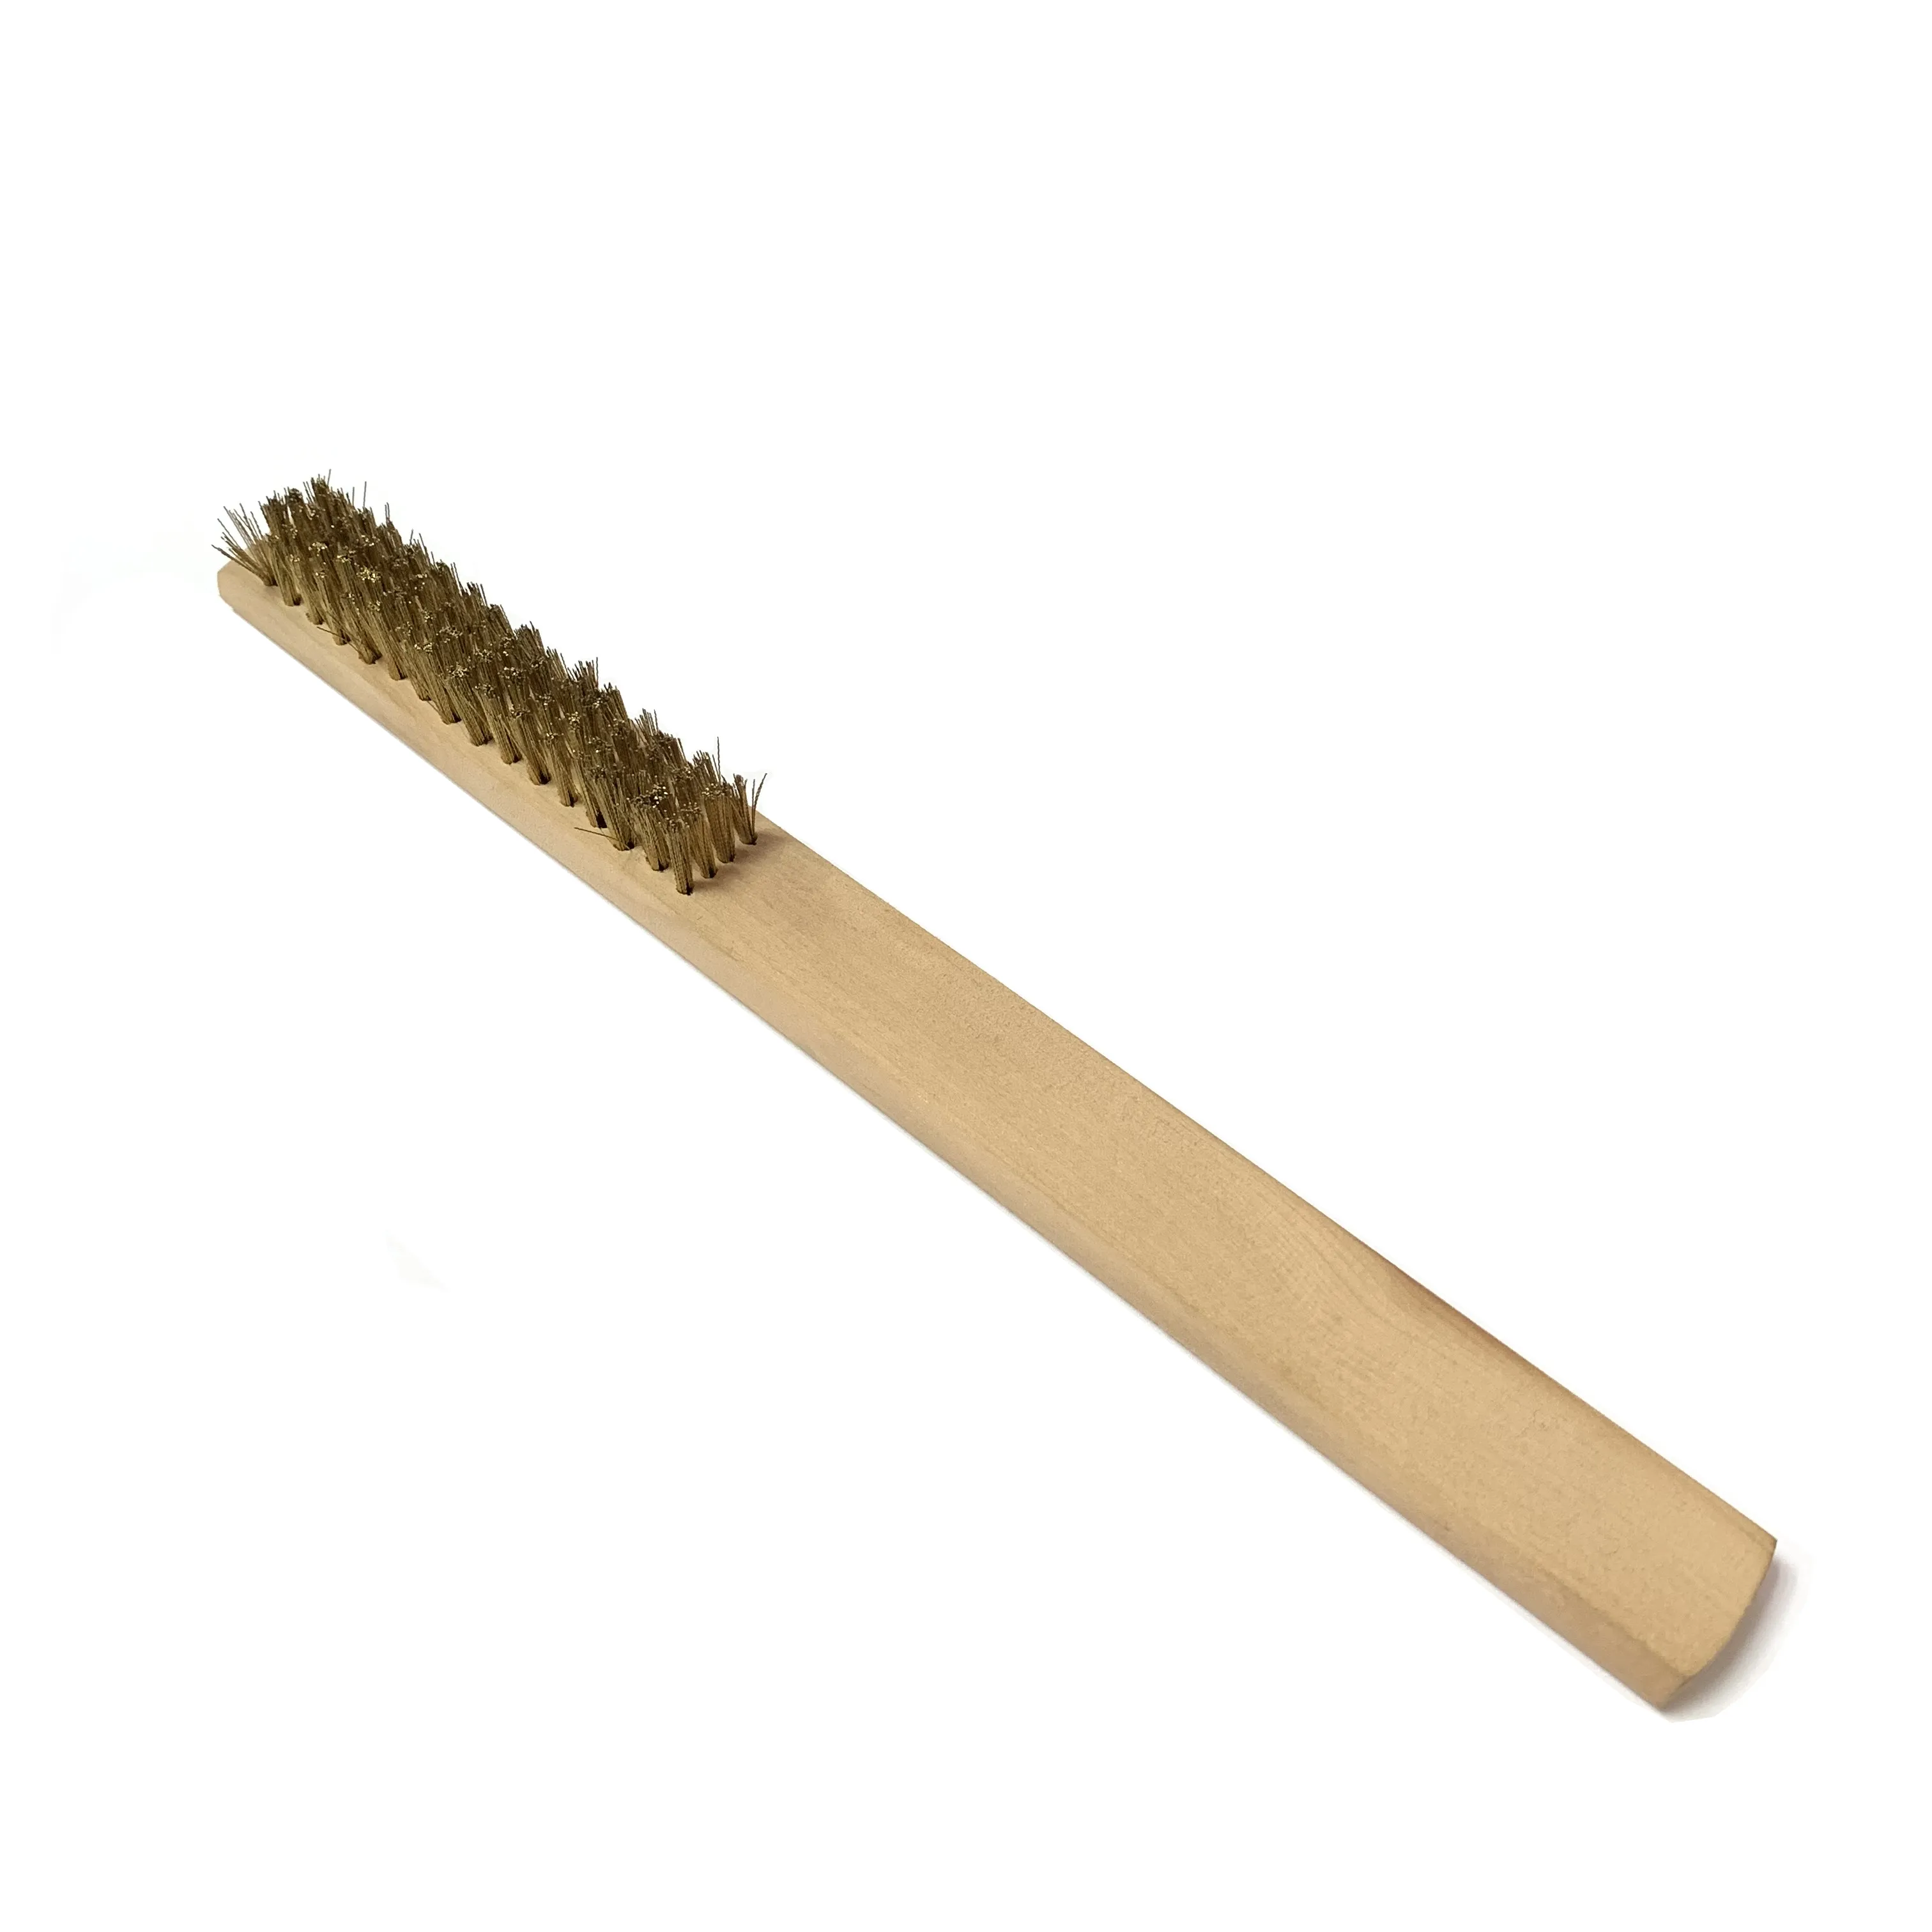 PopTings Economic Jewelry Making Tools Wholesale Brass Wire Brush MKT023 Soft Bristle Brush for Industrial Devices Surface